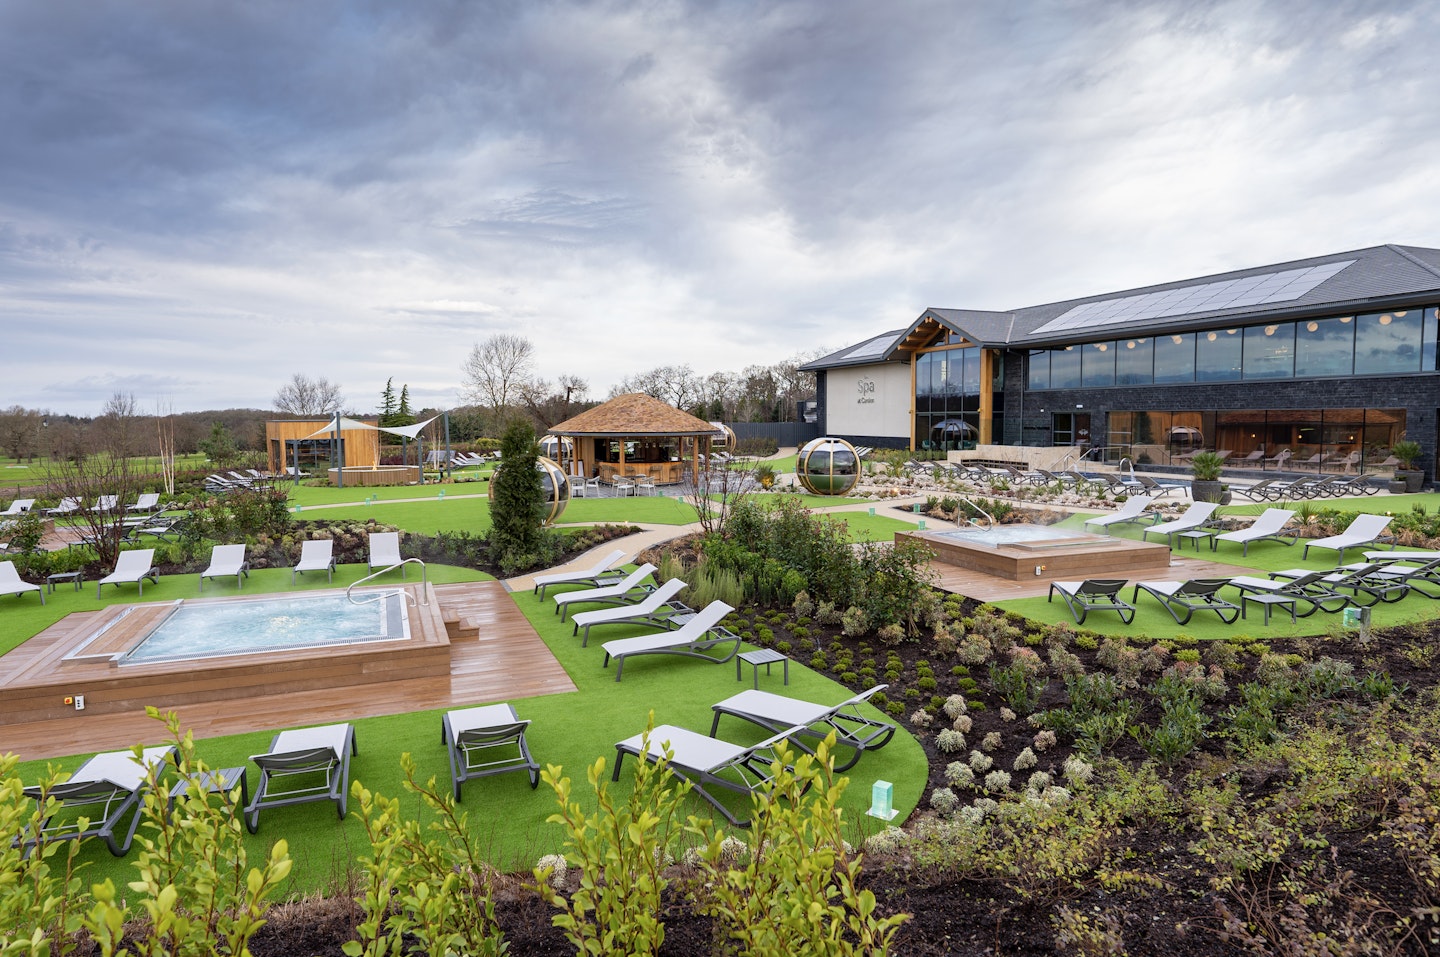 The Spa at Carden, Cheshire